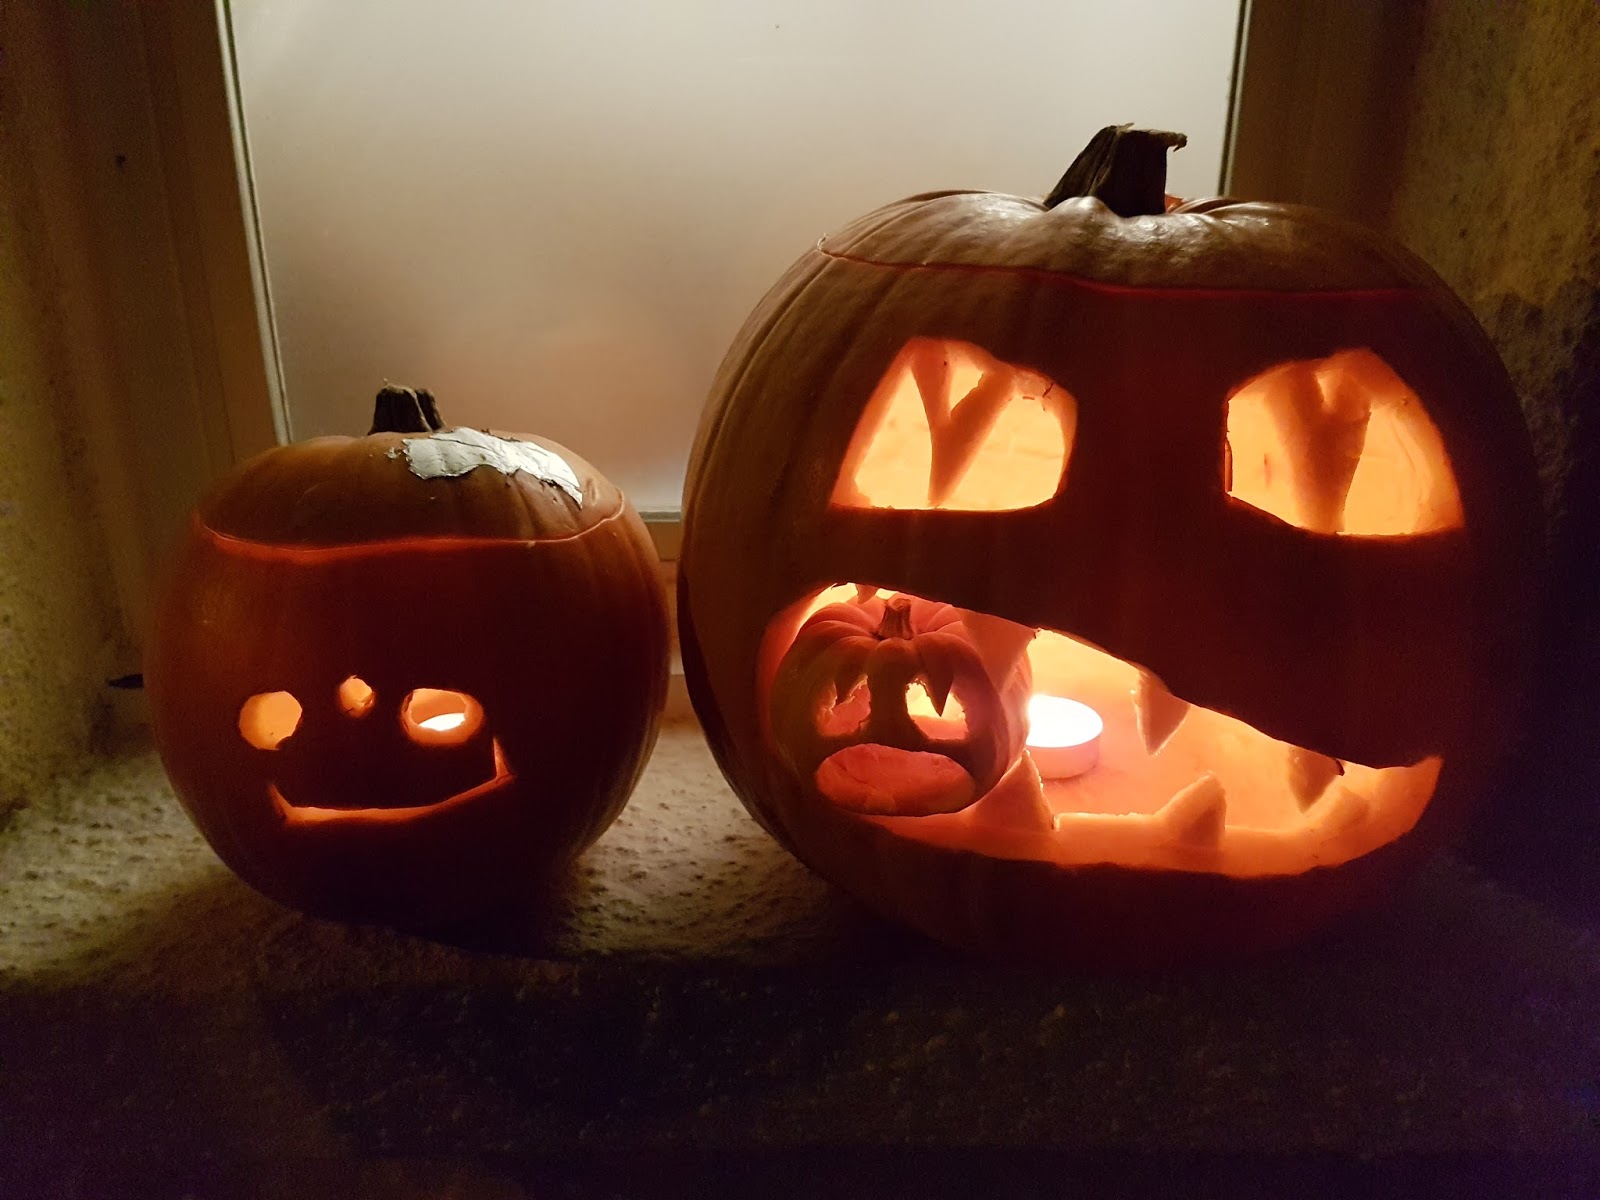 two jack o lanterns with one eating a mini pumpkin and one made by a toddler